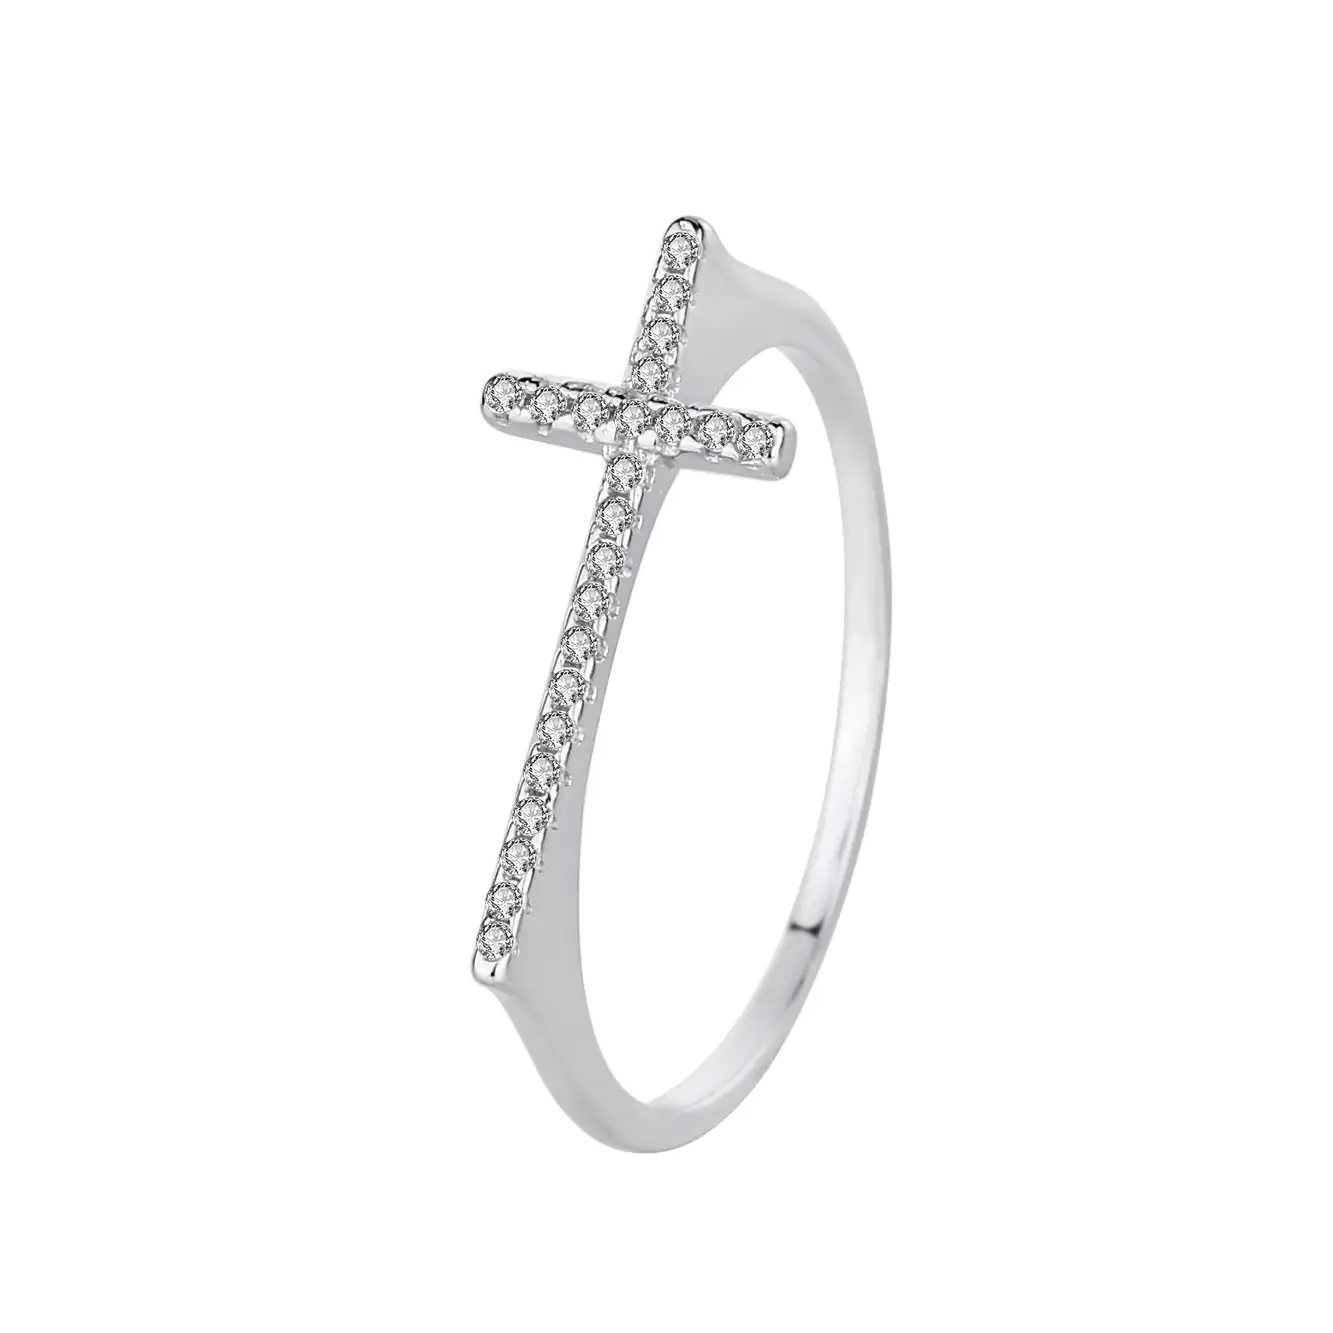 Silver Cubic Zirconia Cross Band Ring 70100015